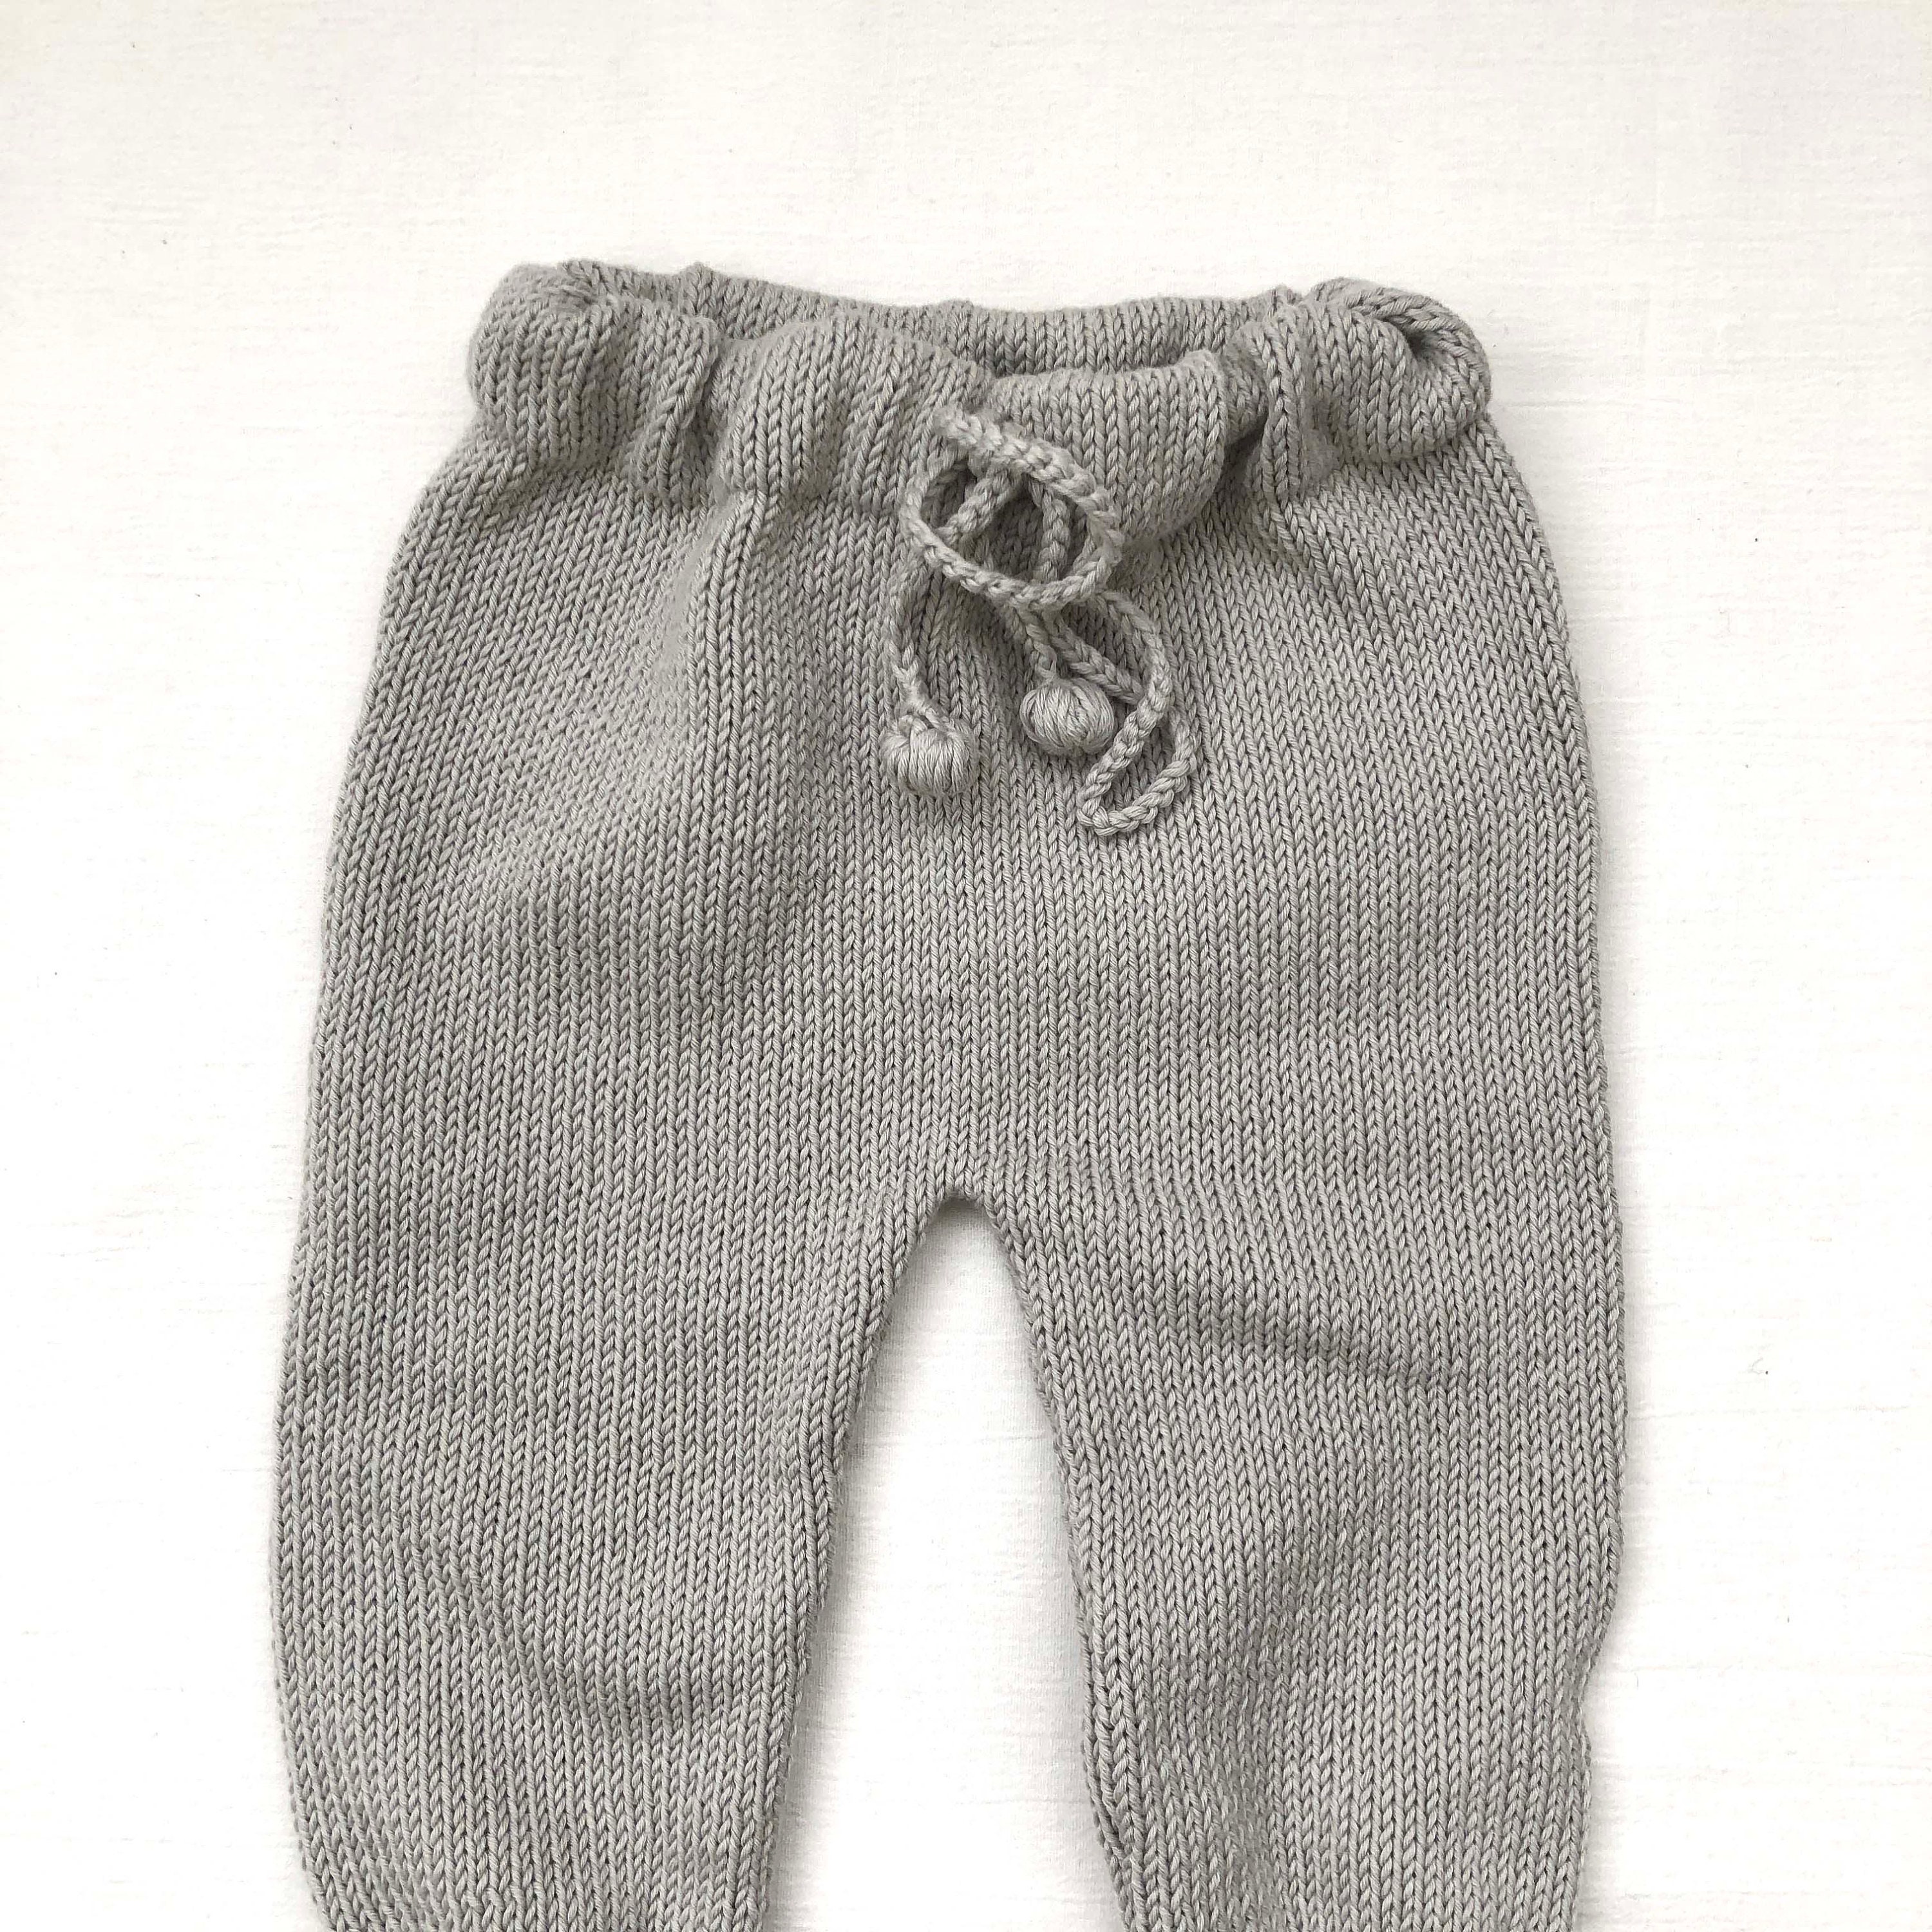 Hand Knitted Baby Pants 100% Organic Cotton Handmade Pure | Etsy